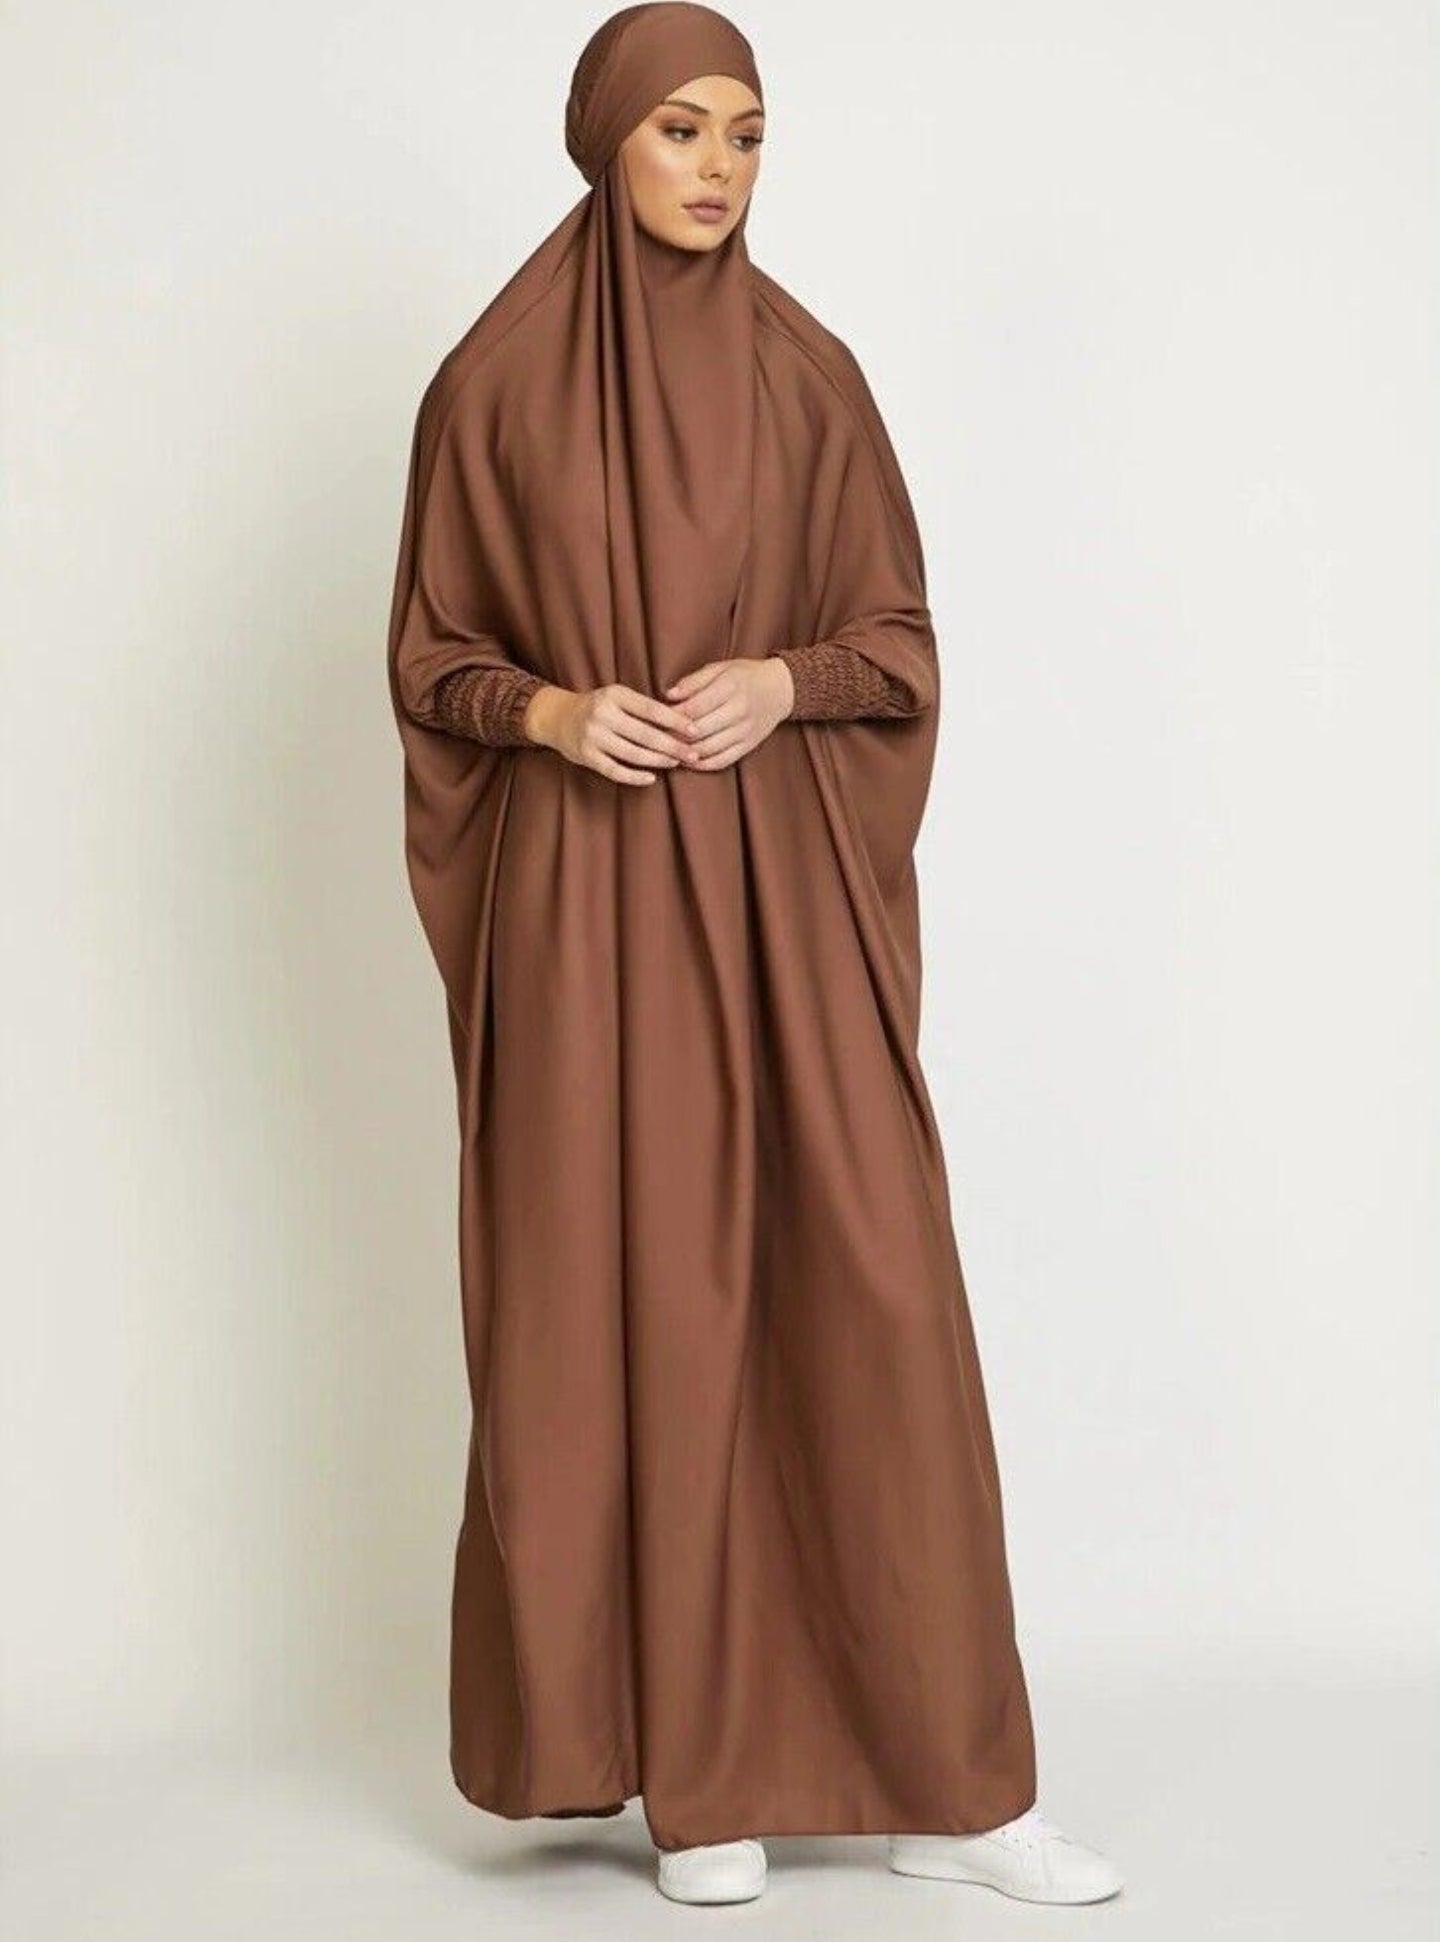 Embrace warmth and elegance with our Coffee One Piece Tie-Up Jilbab. Tailored from premium satin material, this exclusive Islamic garment offers both comfort and opulence. Discover the perfect blend of modesty and style at Hikmah Boutique.